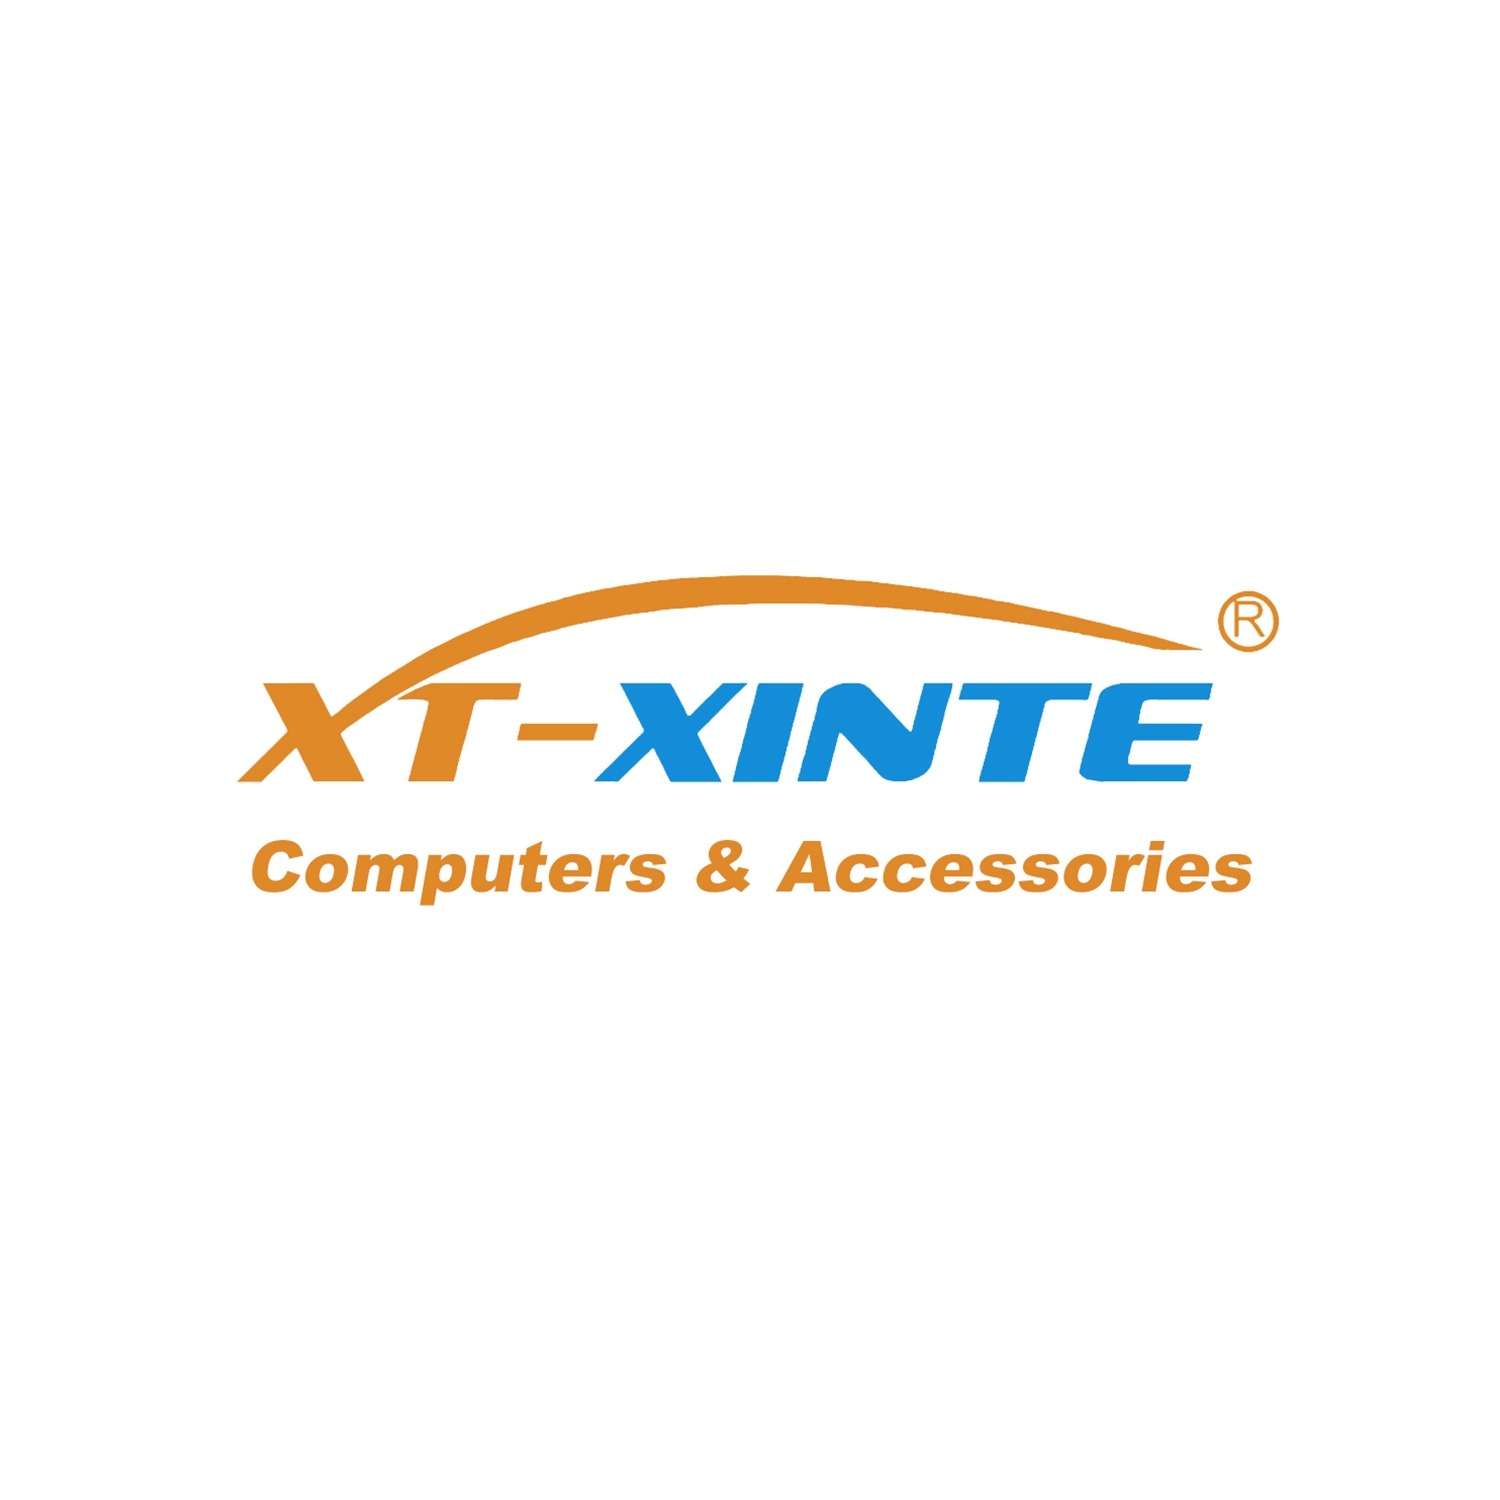 XT-XINTE Computers&Accessories